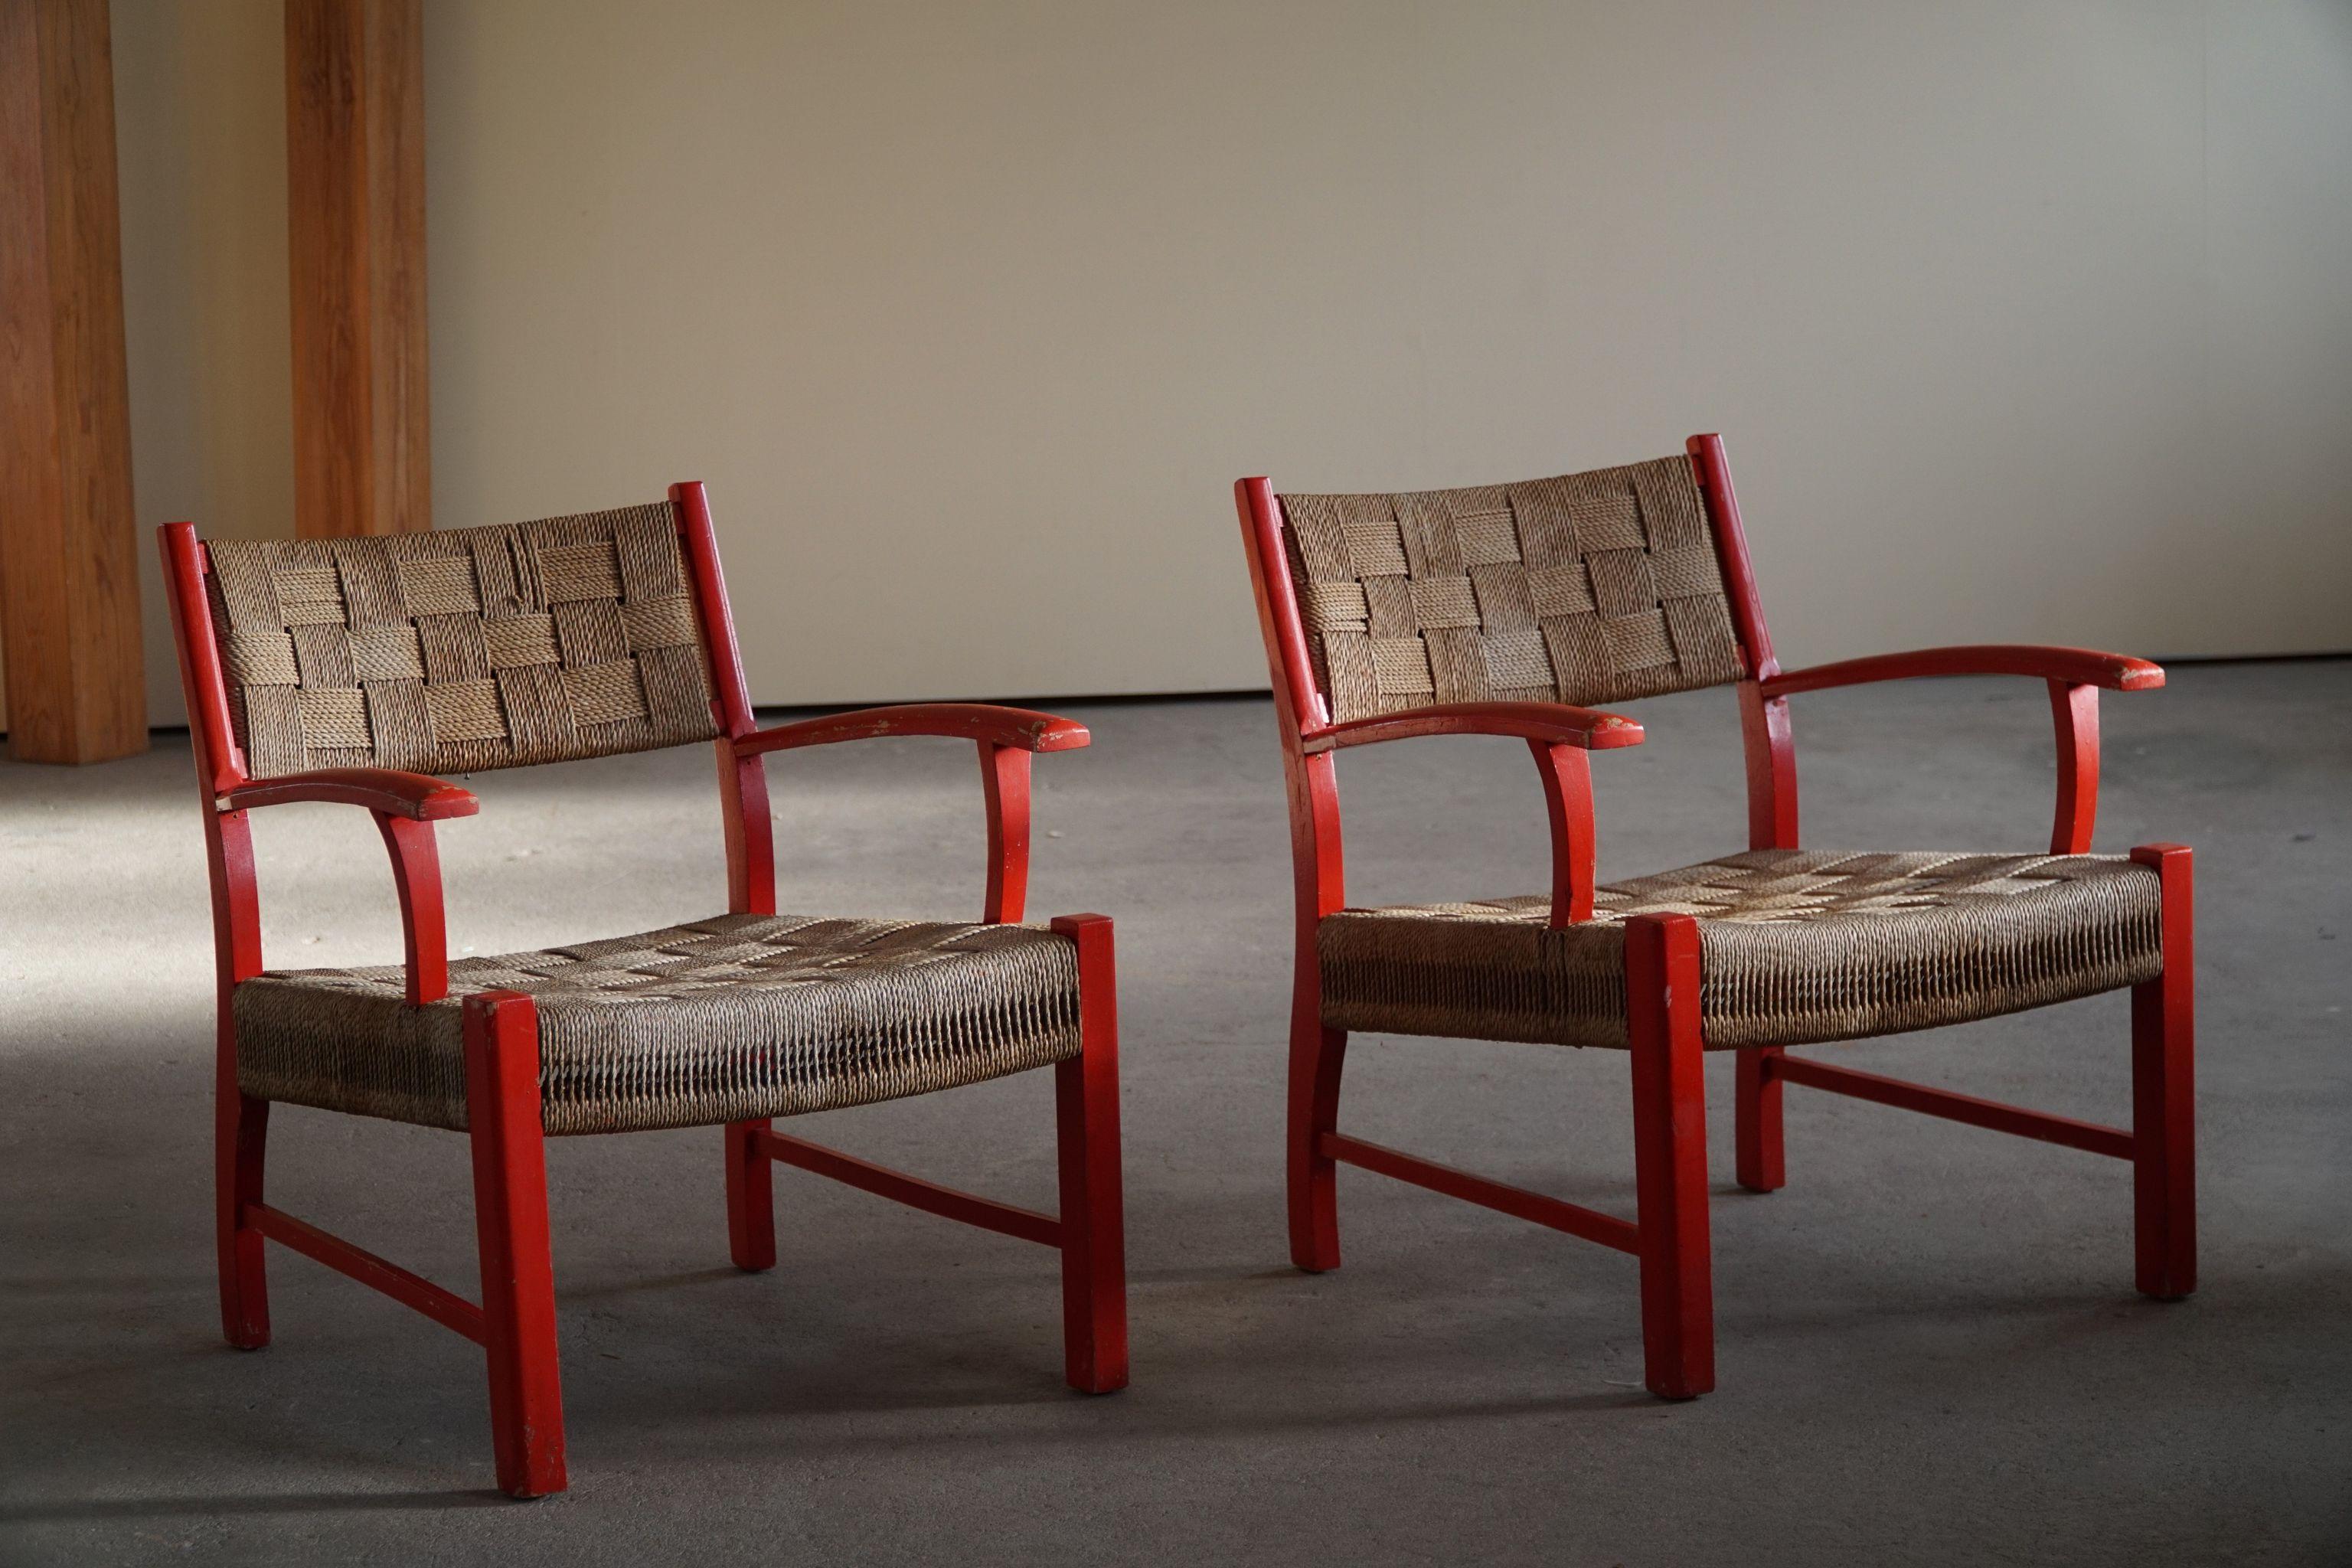 20th Century Danish Modern Pair of Lounge Chairs in Seagrass, by Fritz Hansen, 1930-1940s